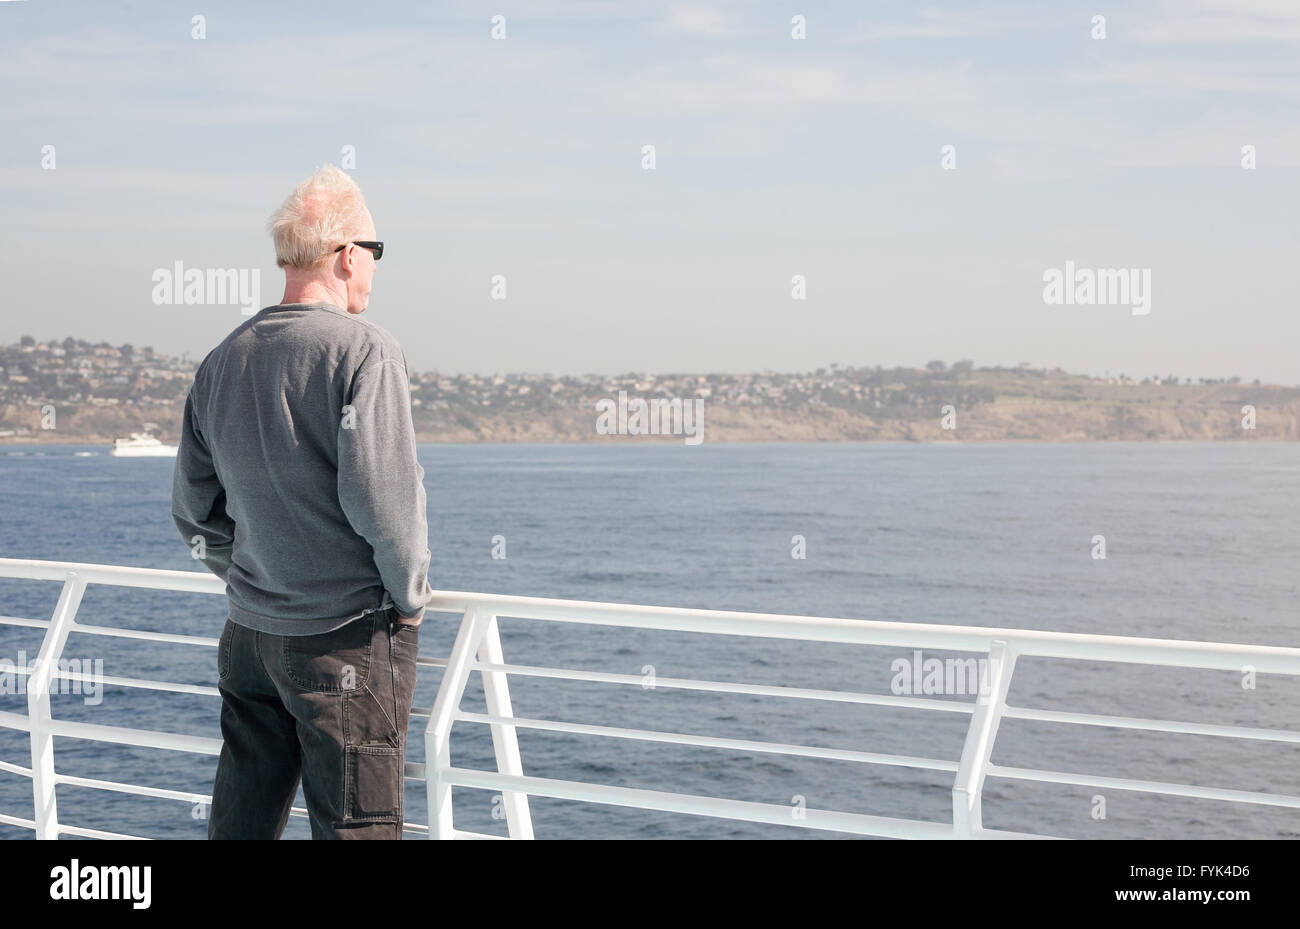 Middle age man dressed casually wearing sunglasses stands next to a white railing on a boat looking out to the water Stock Photo